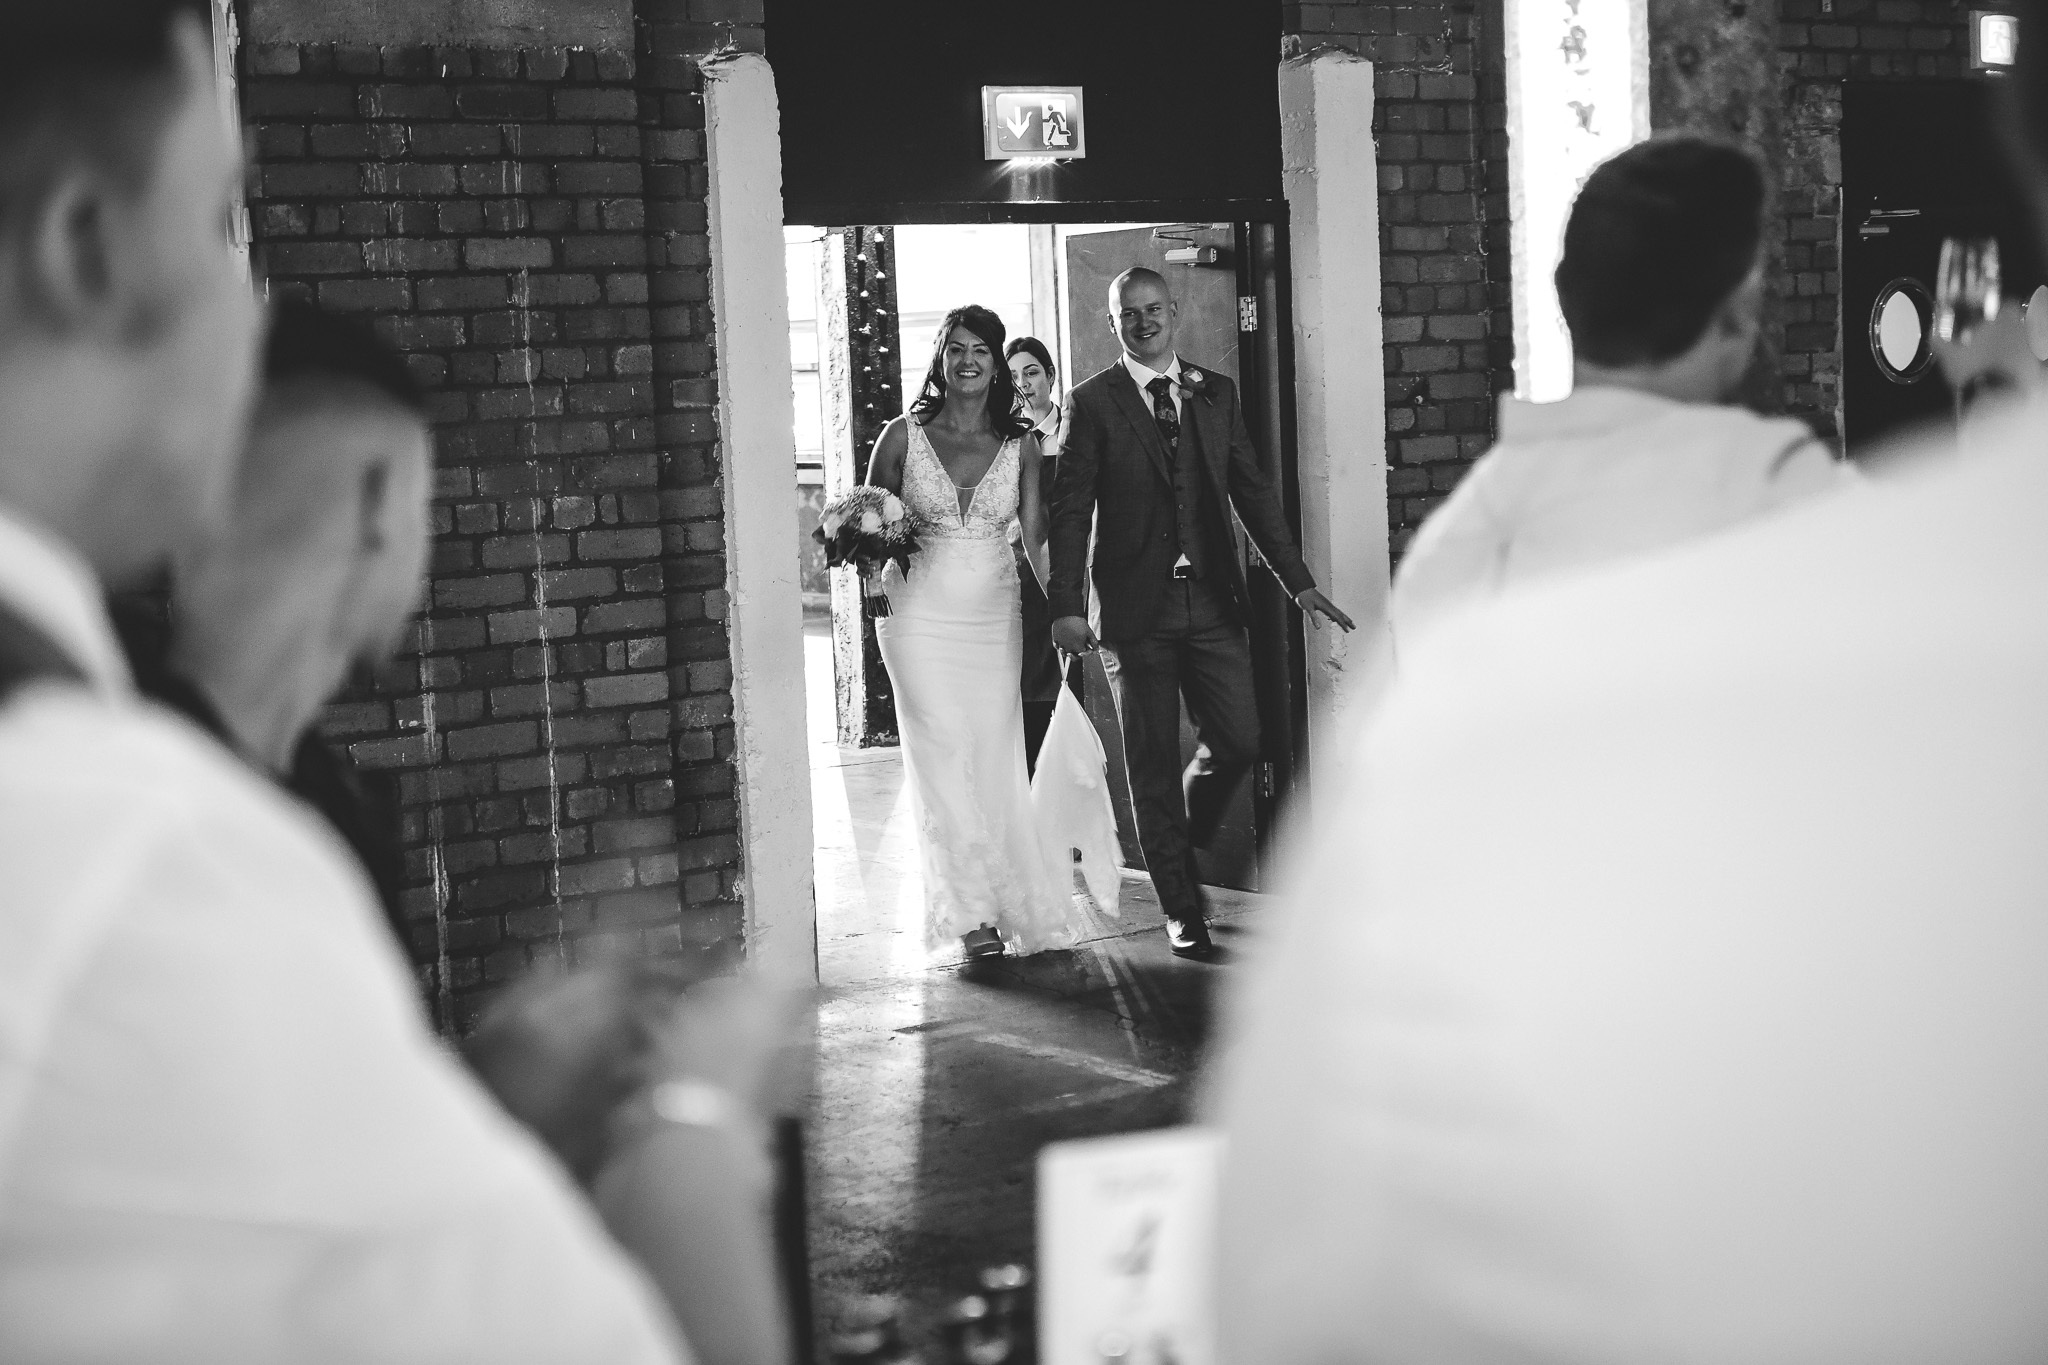 The bride and groom are welcomed to machester wedding venue, Victoria Warehouse